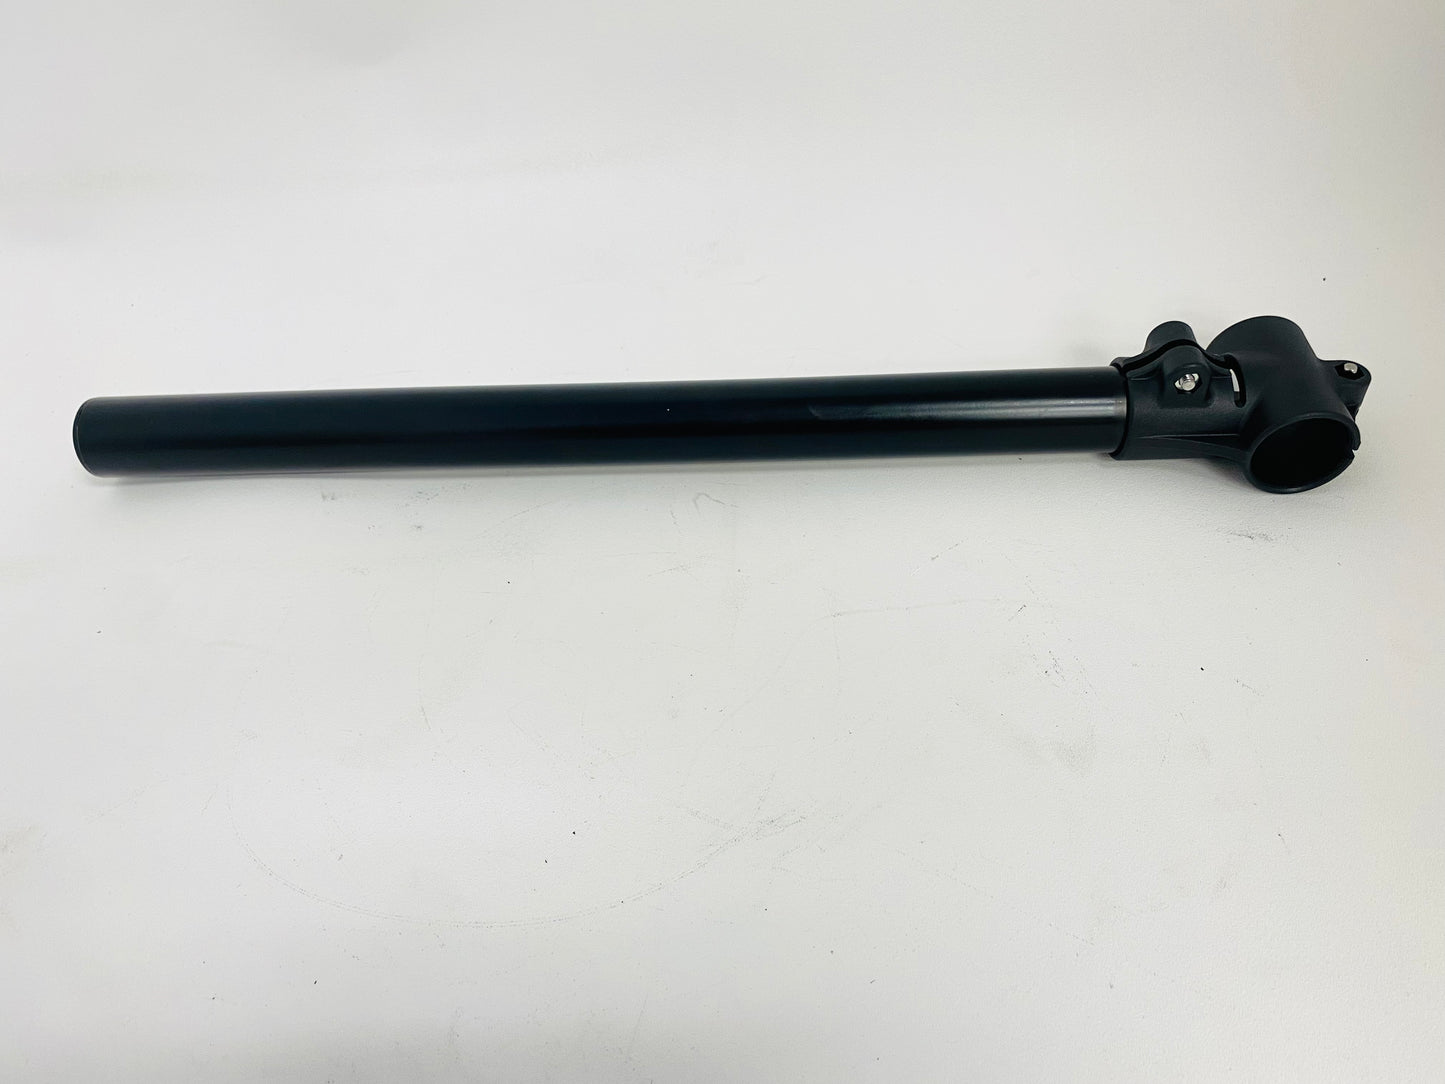 Roland Leg or Extra Long 20” Rack Extension Arm with Clamp